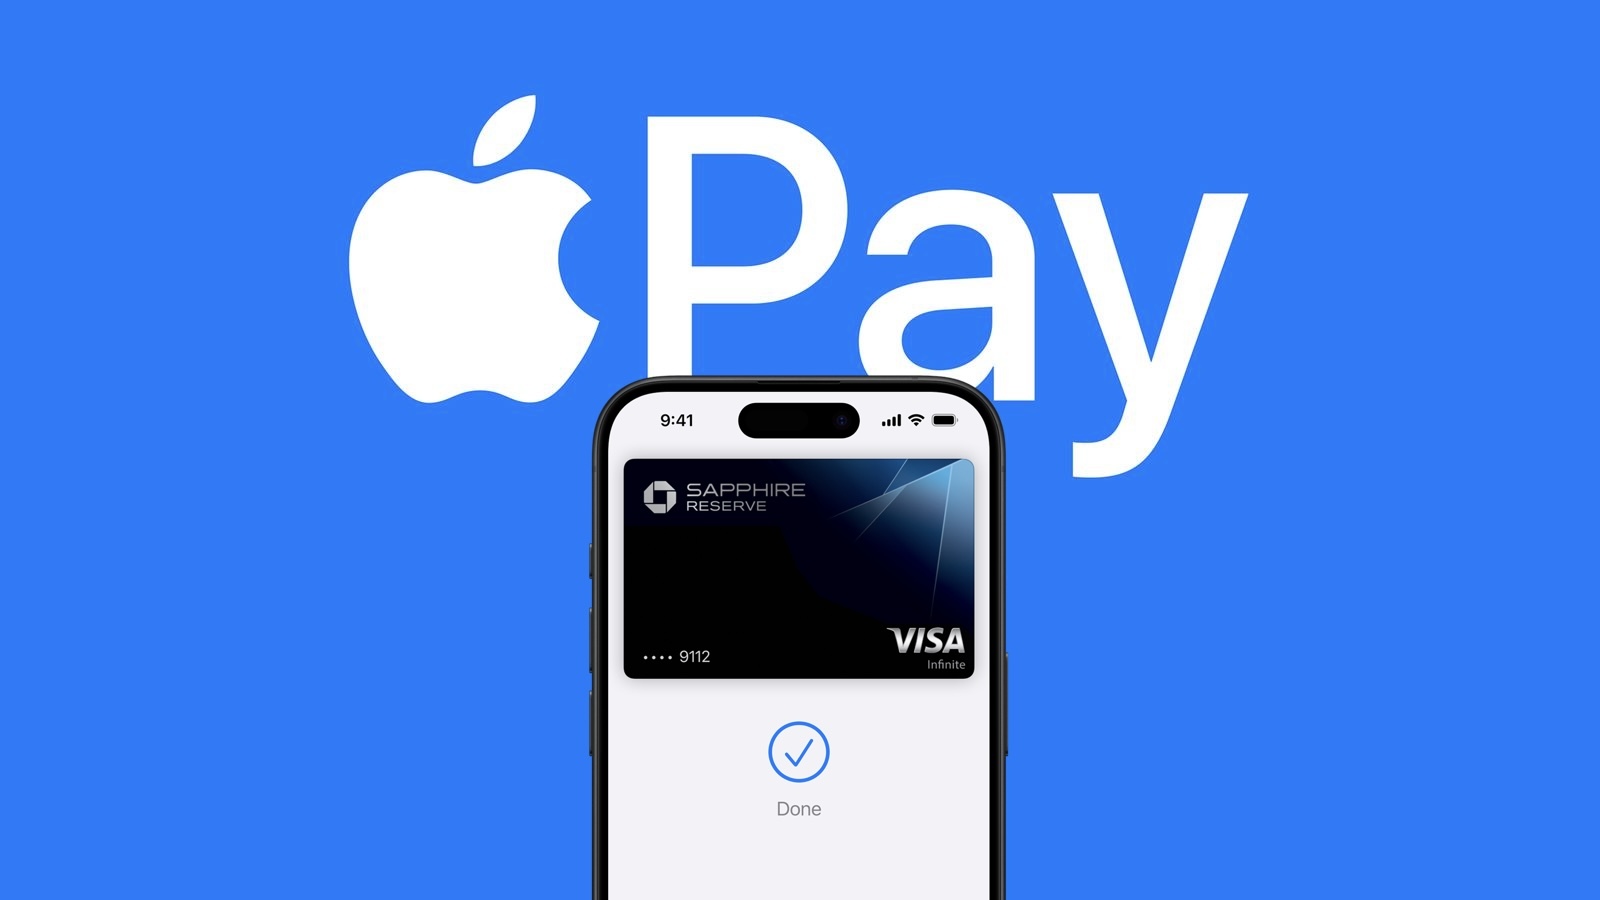 European Regulators Will Soon Approve Apple's Plan to Open Up Tap-to-Pay to Banks and Payment Providers